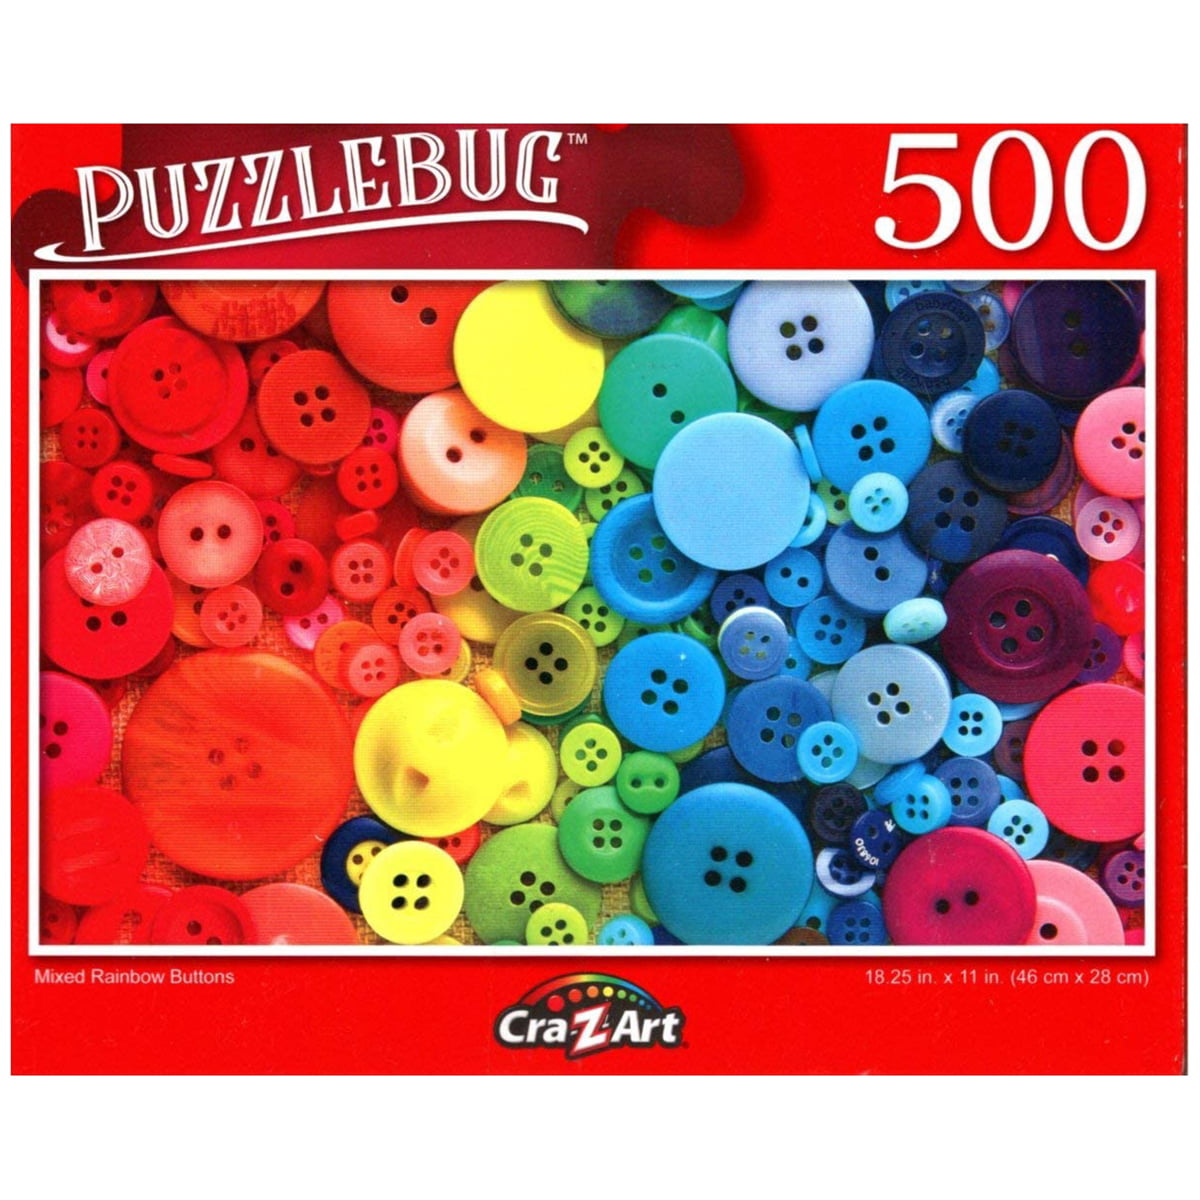 NEW Puzzlebug 500 Piece Jigsaw Puzzle ~ Fresh Fruits and Vegetables 